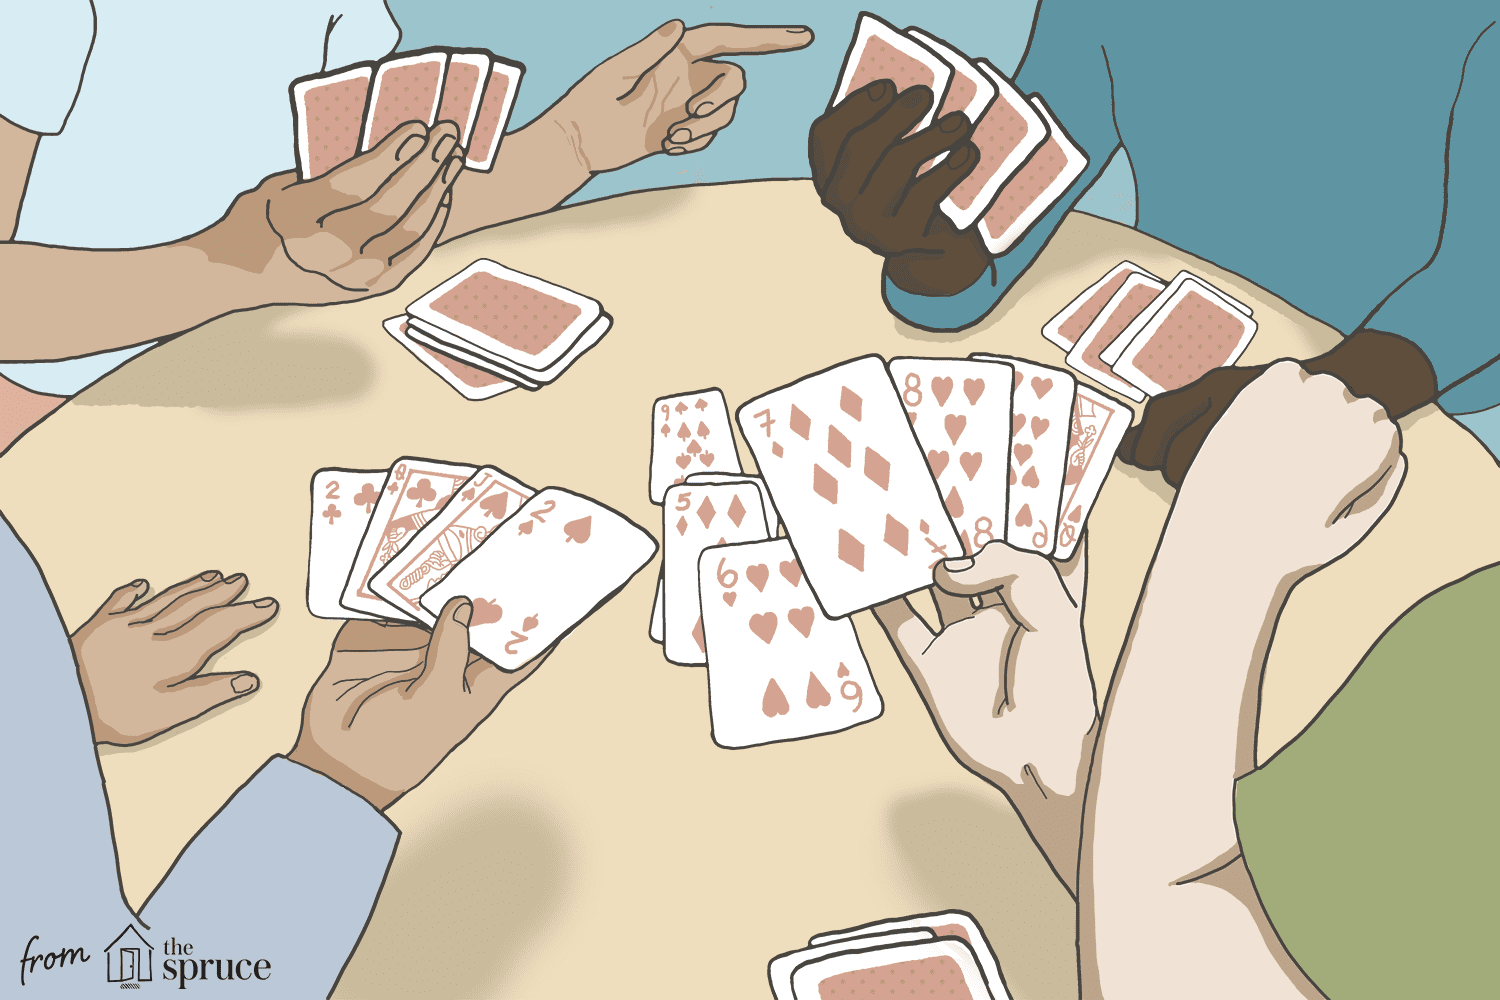 Illustration of hands playing euchre